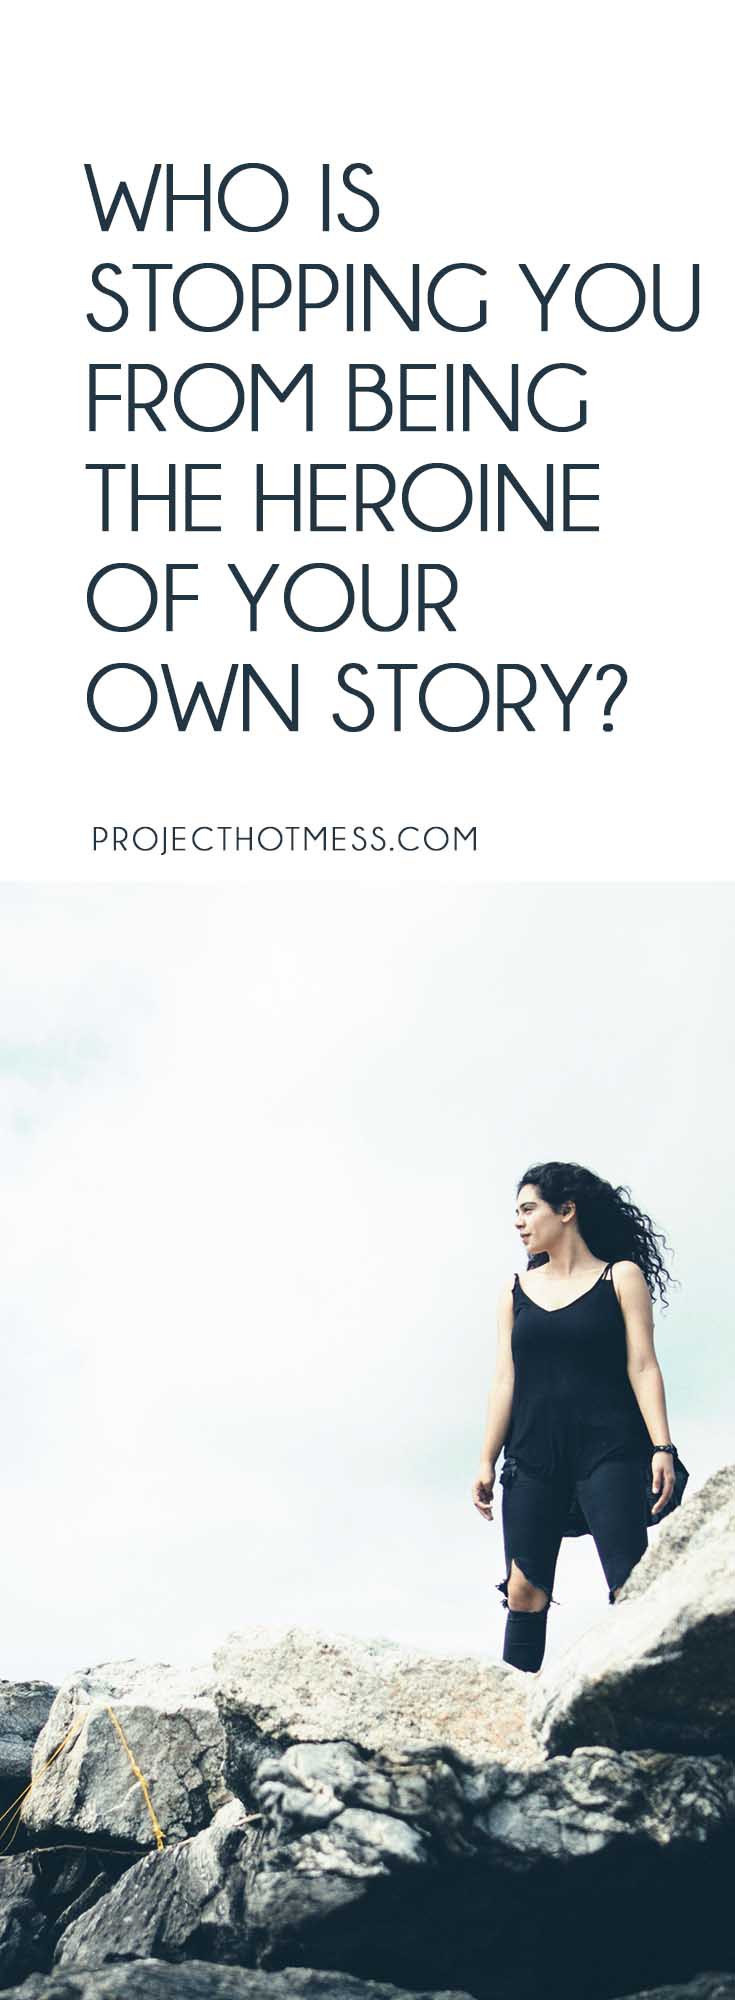 Do you ever wonder who is the Heroine of your story? Your life is your story, the one you get to live. Take control and start being the heroine right now, it's your story, make it however you want it to be.